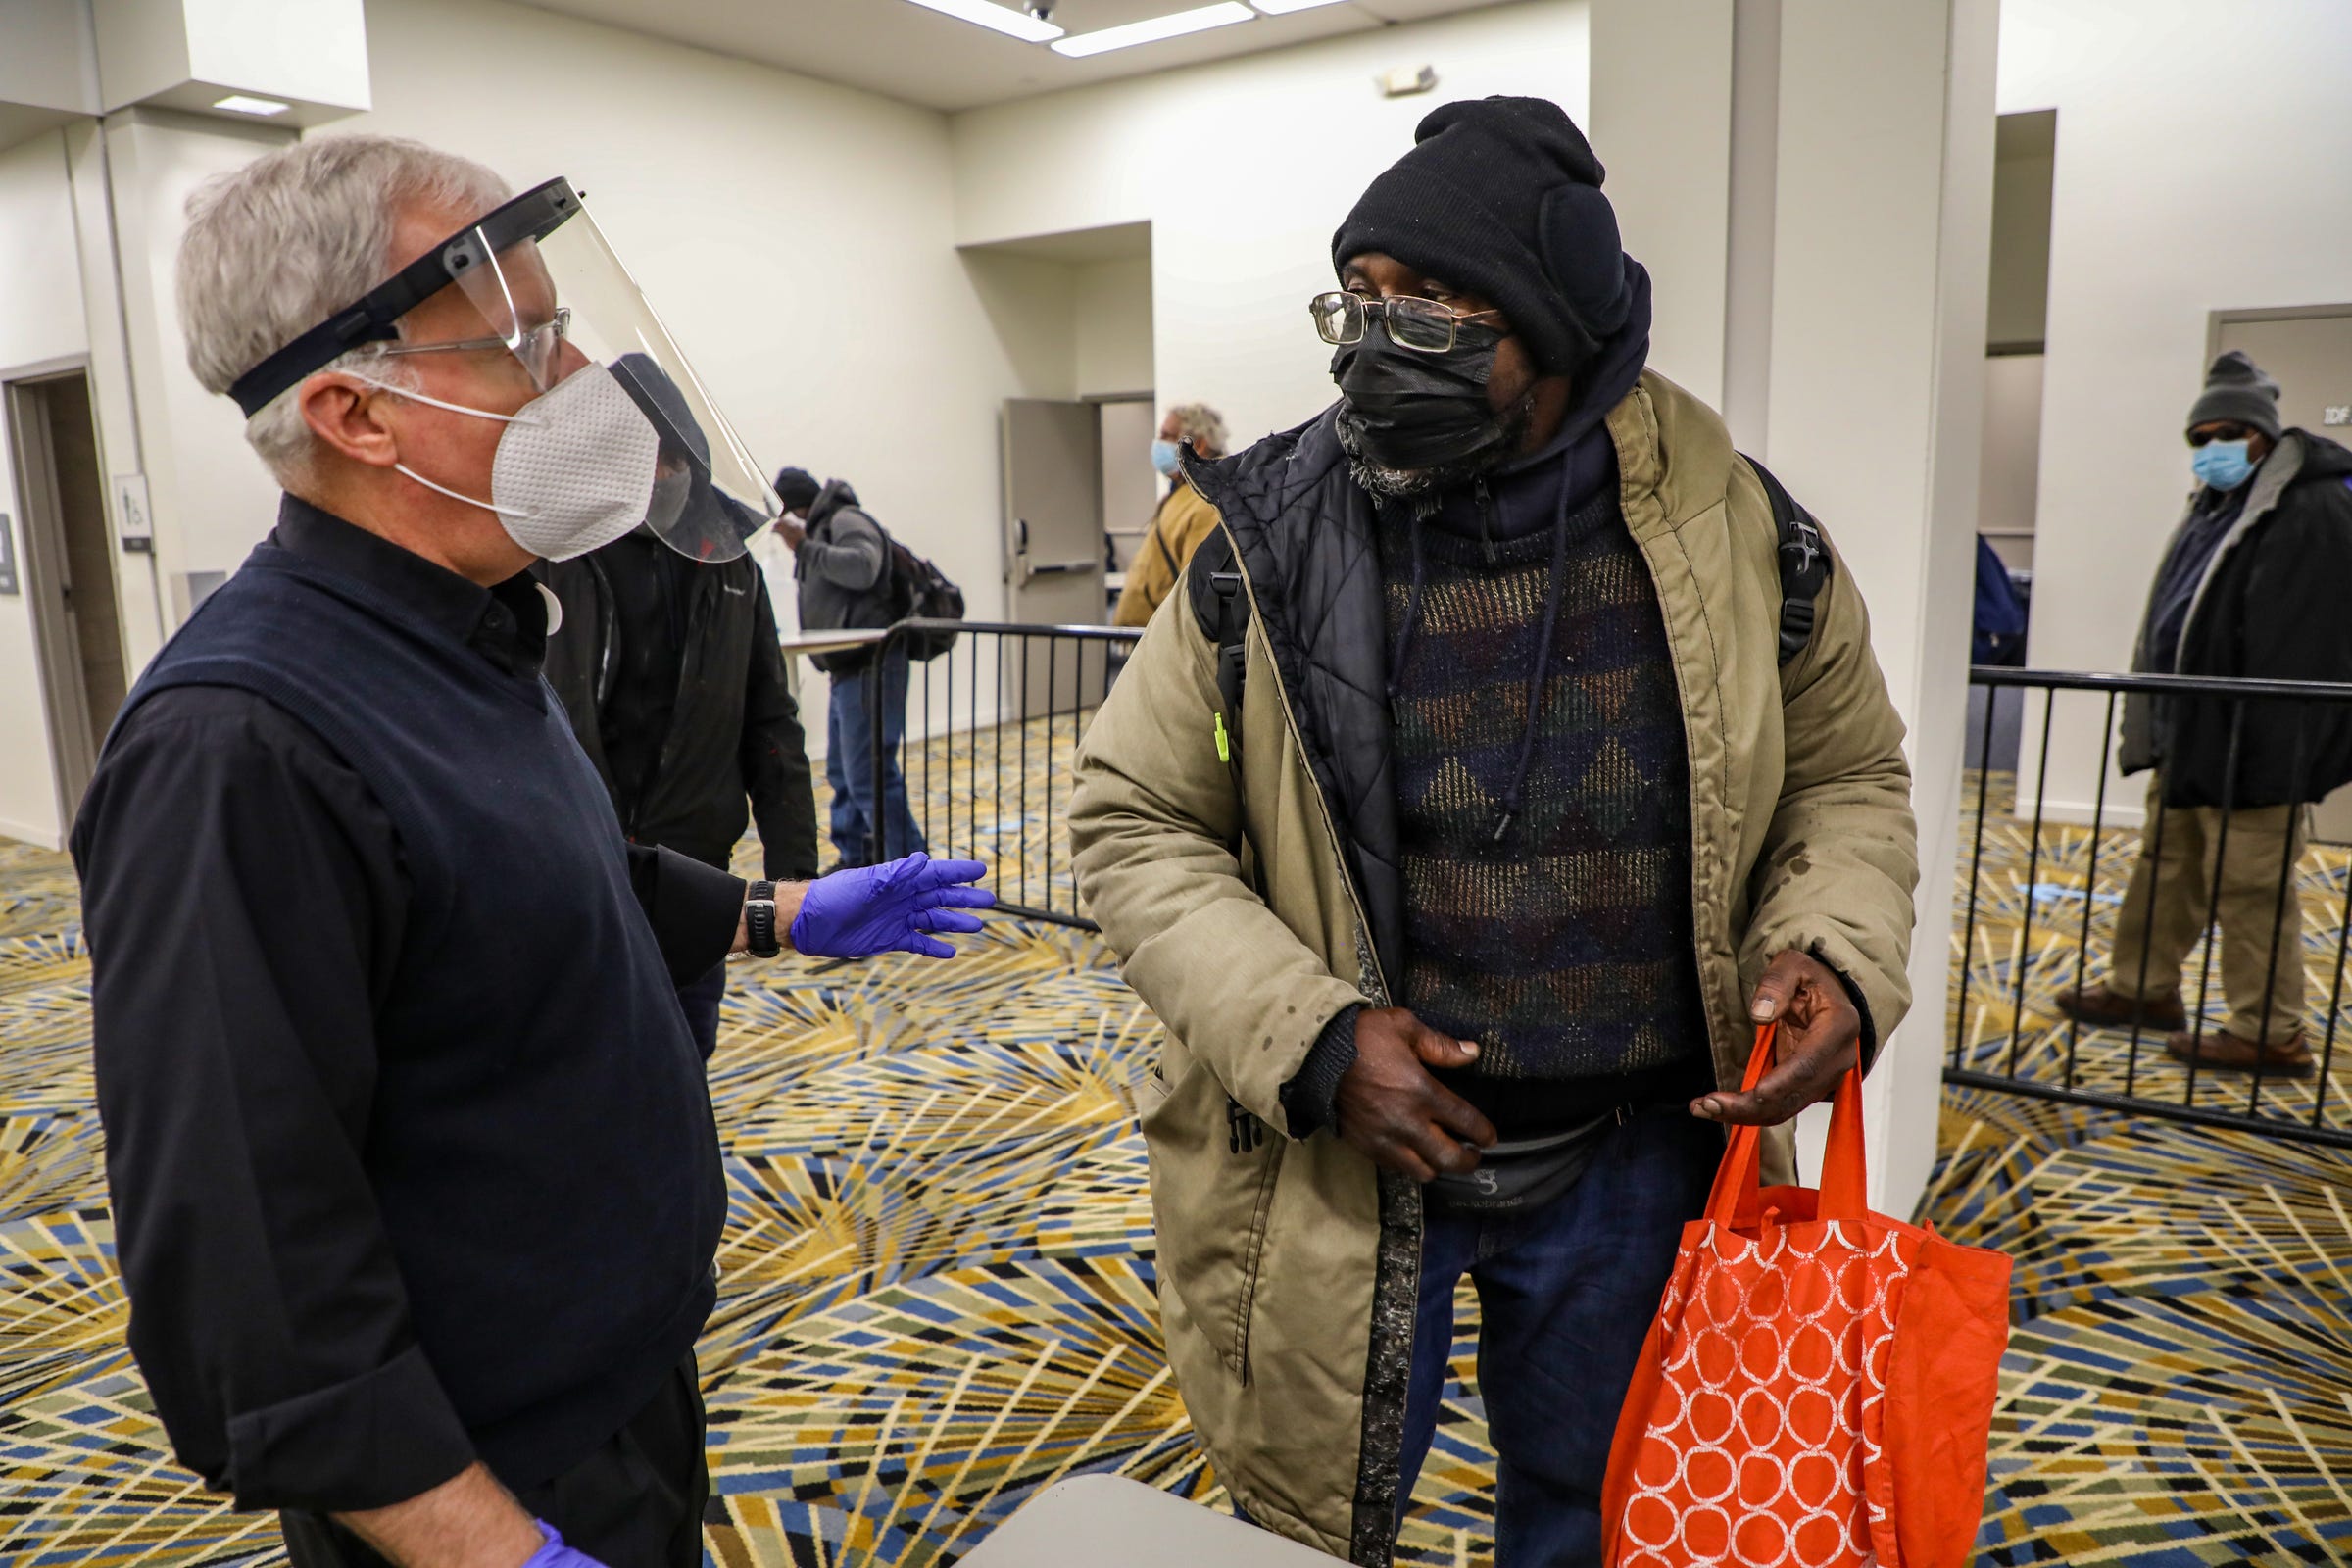 Father Tim McCabe, S.J. talks with Wayne Shropshire as he steps to the front of the line to receive one of the two free meals served by the Pope Francis Center temporarily relocated at the TCF Center in downtown Detroit to better accommodate the homeless population it serves during the coronavirus pandemic on Dec. 8, 2020.